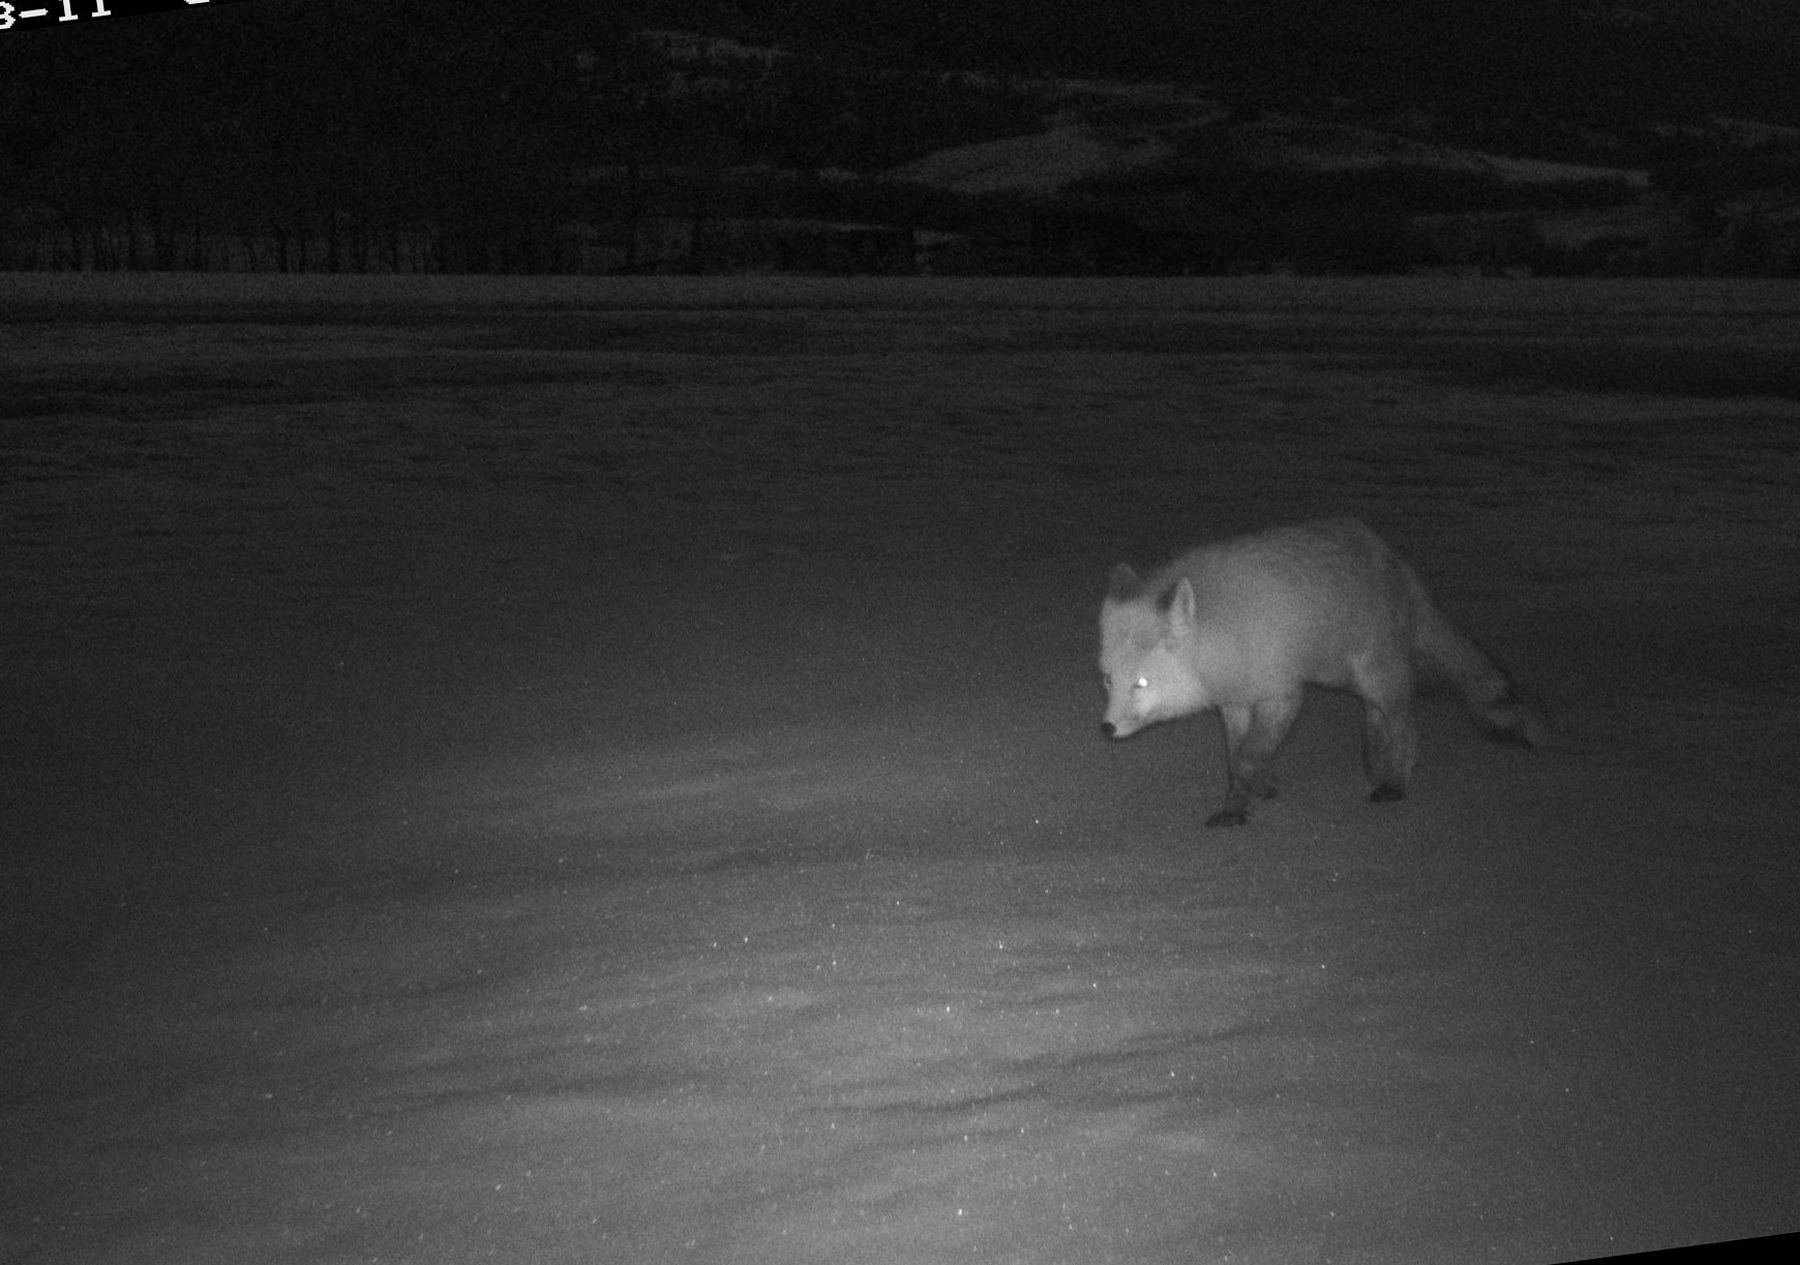 Fox, Red Lodge, Montana.  I usually dont crop trailcam images, but the image was crooked and I had to straighten it.  Click for next photo.